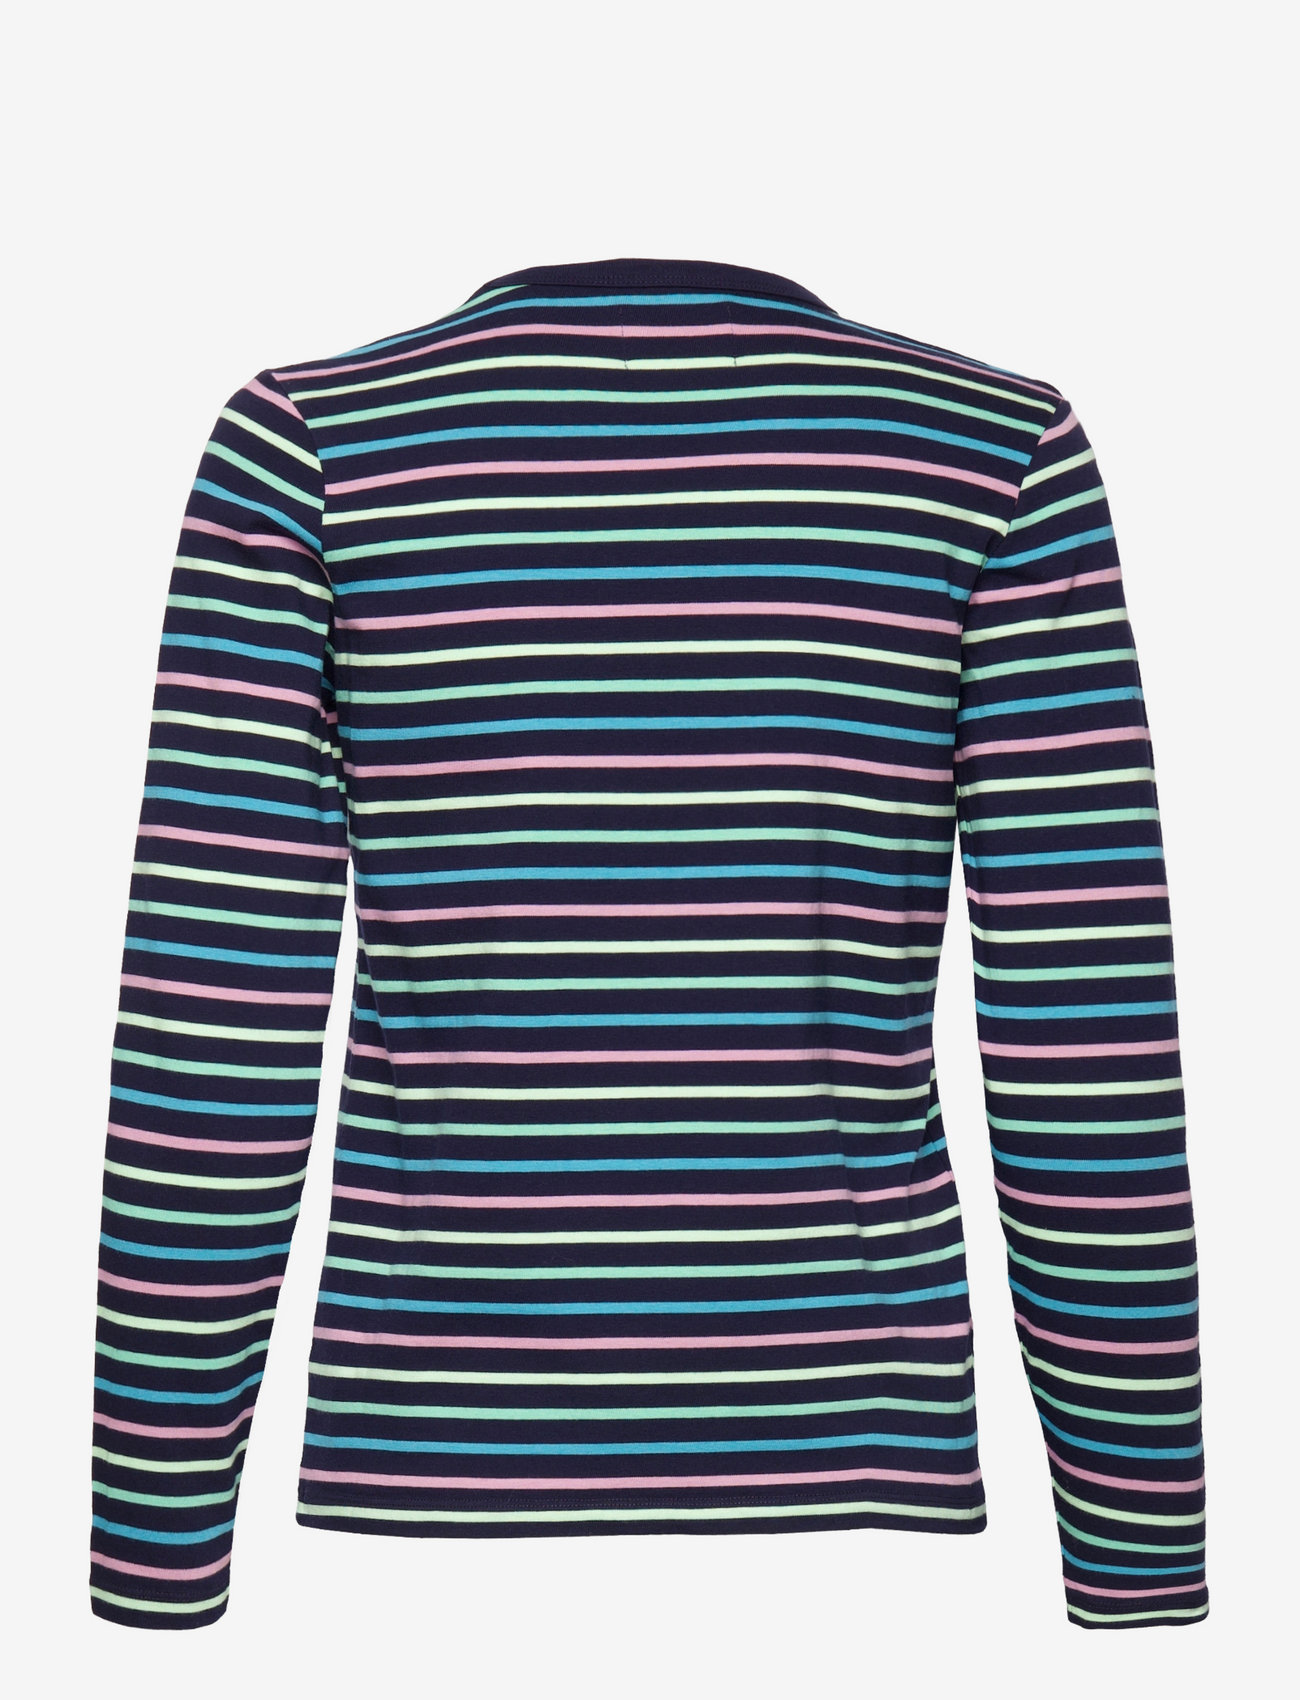 Double A by Wood Wood - Moa stripe long sleeve - t-shirt & tops - navy stripes - 1